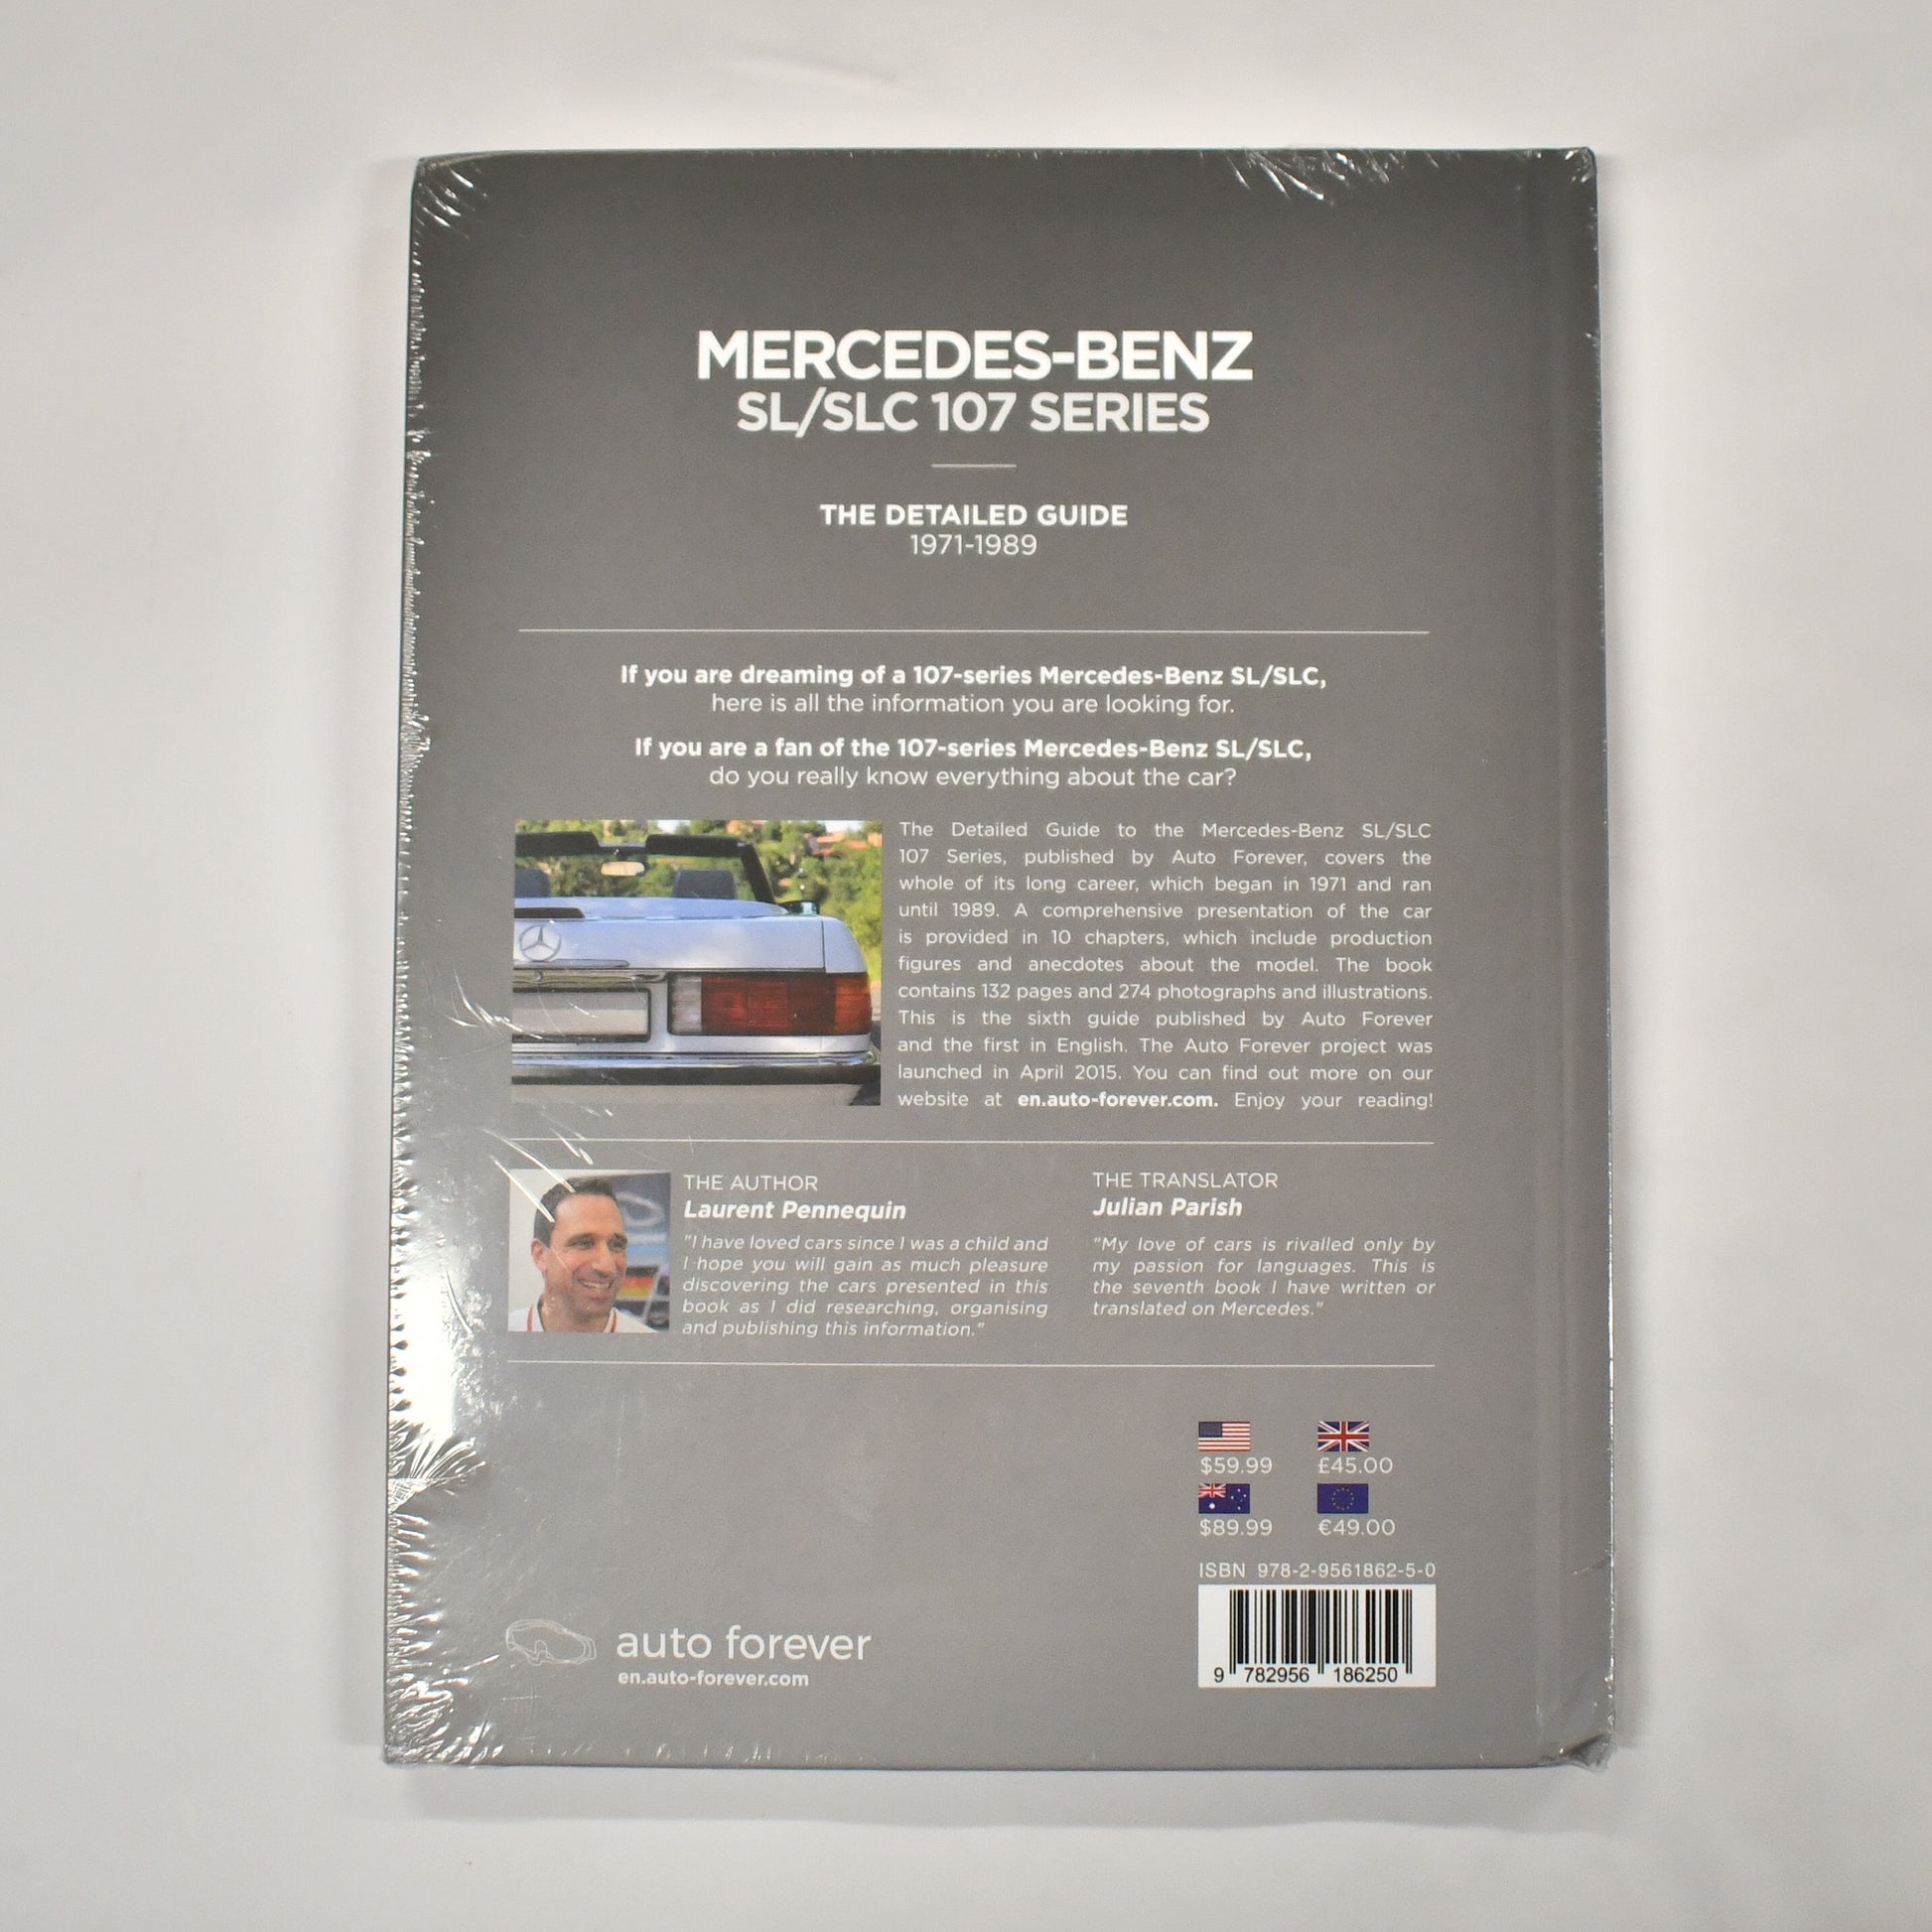 Mercedes-Benz SL/SLC 107 Series Detailed Guide Book - R107 and C107 Models - Classic Trim Parts